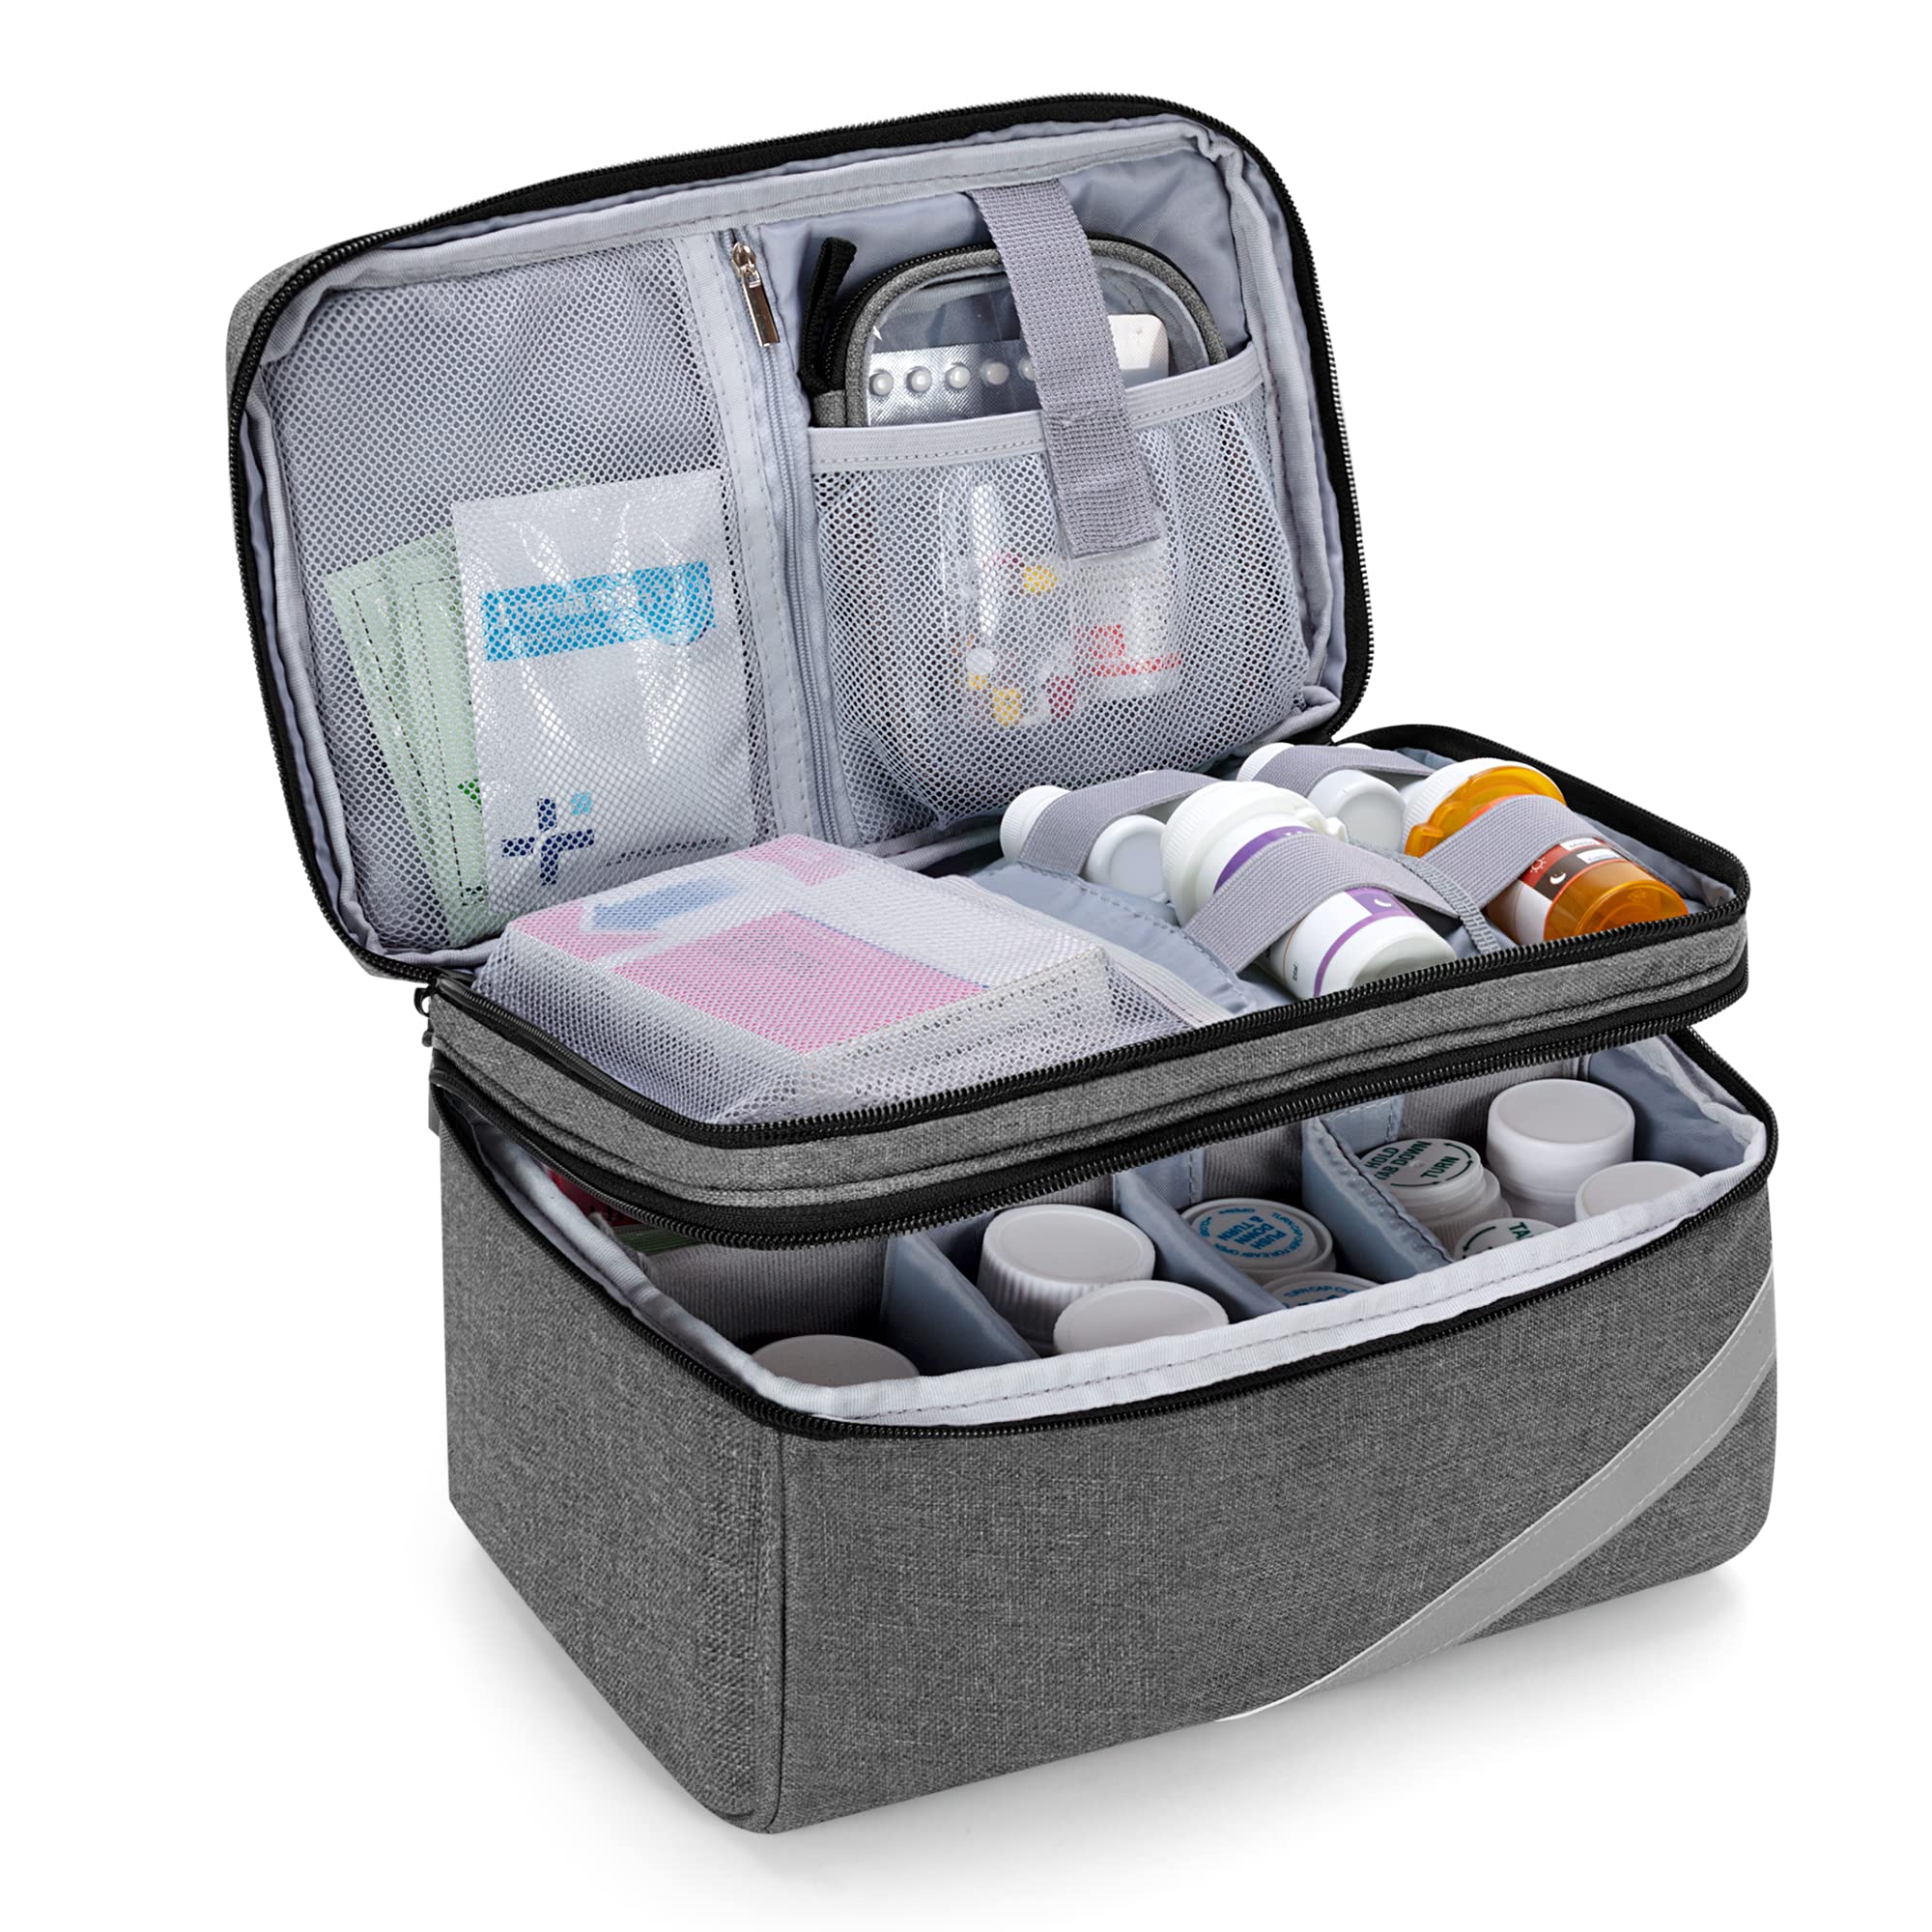 Trunab Medicine Storage and Organizer Bag Empty, Pill Bottle Organizer with  Portable Small Pouch, Home First Aid Box for Emergency Medication,  Supplements or Medical Kits (Bag Only)(Patent Pending) Grey